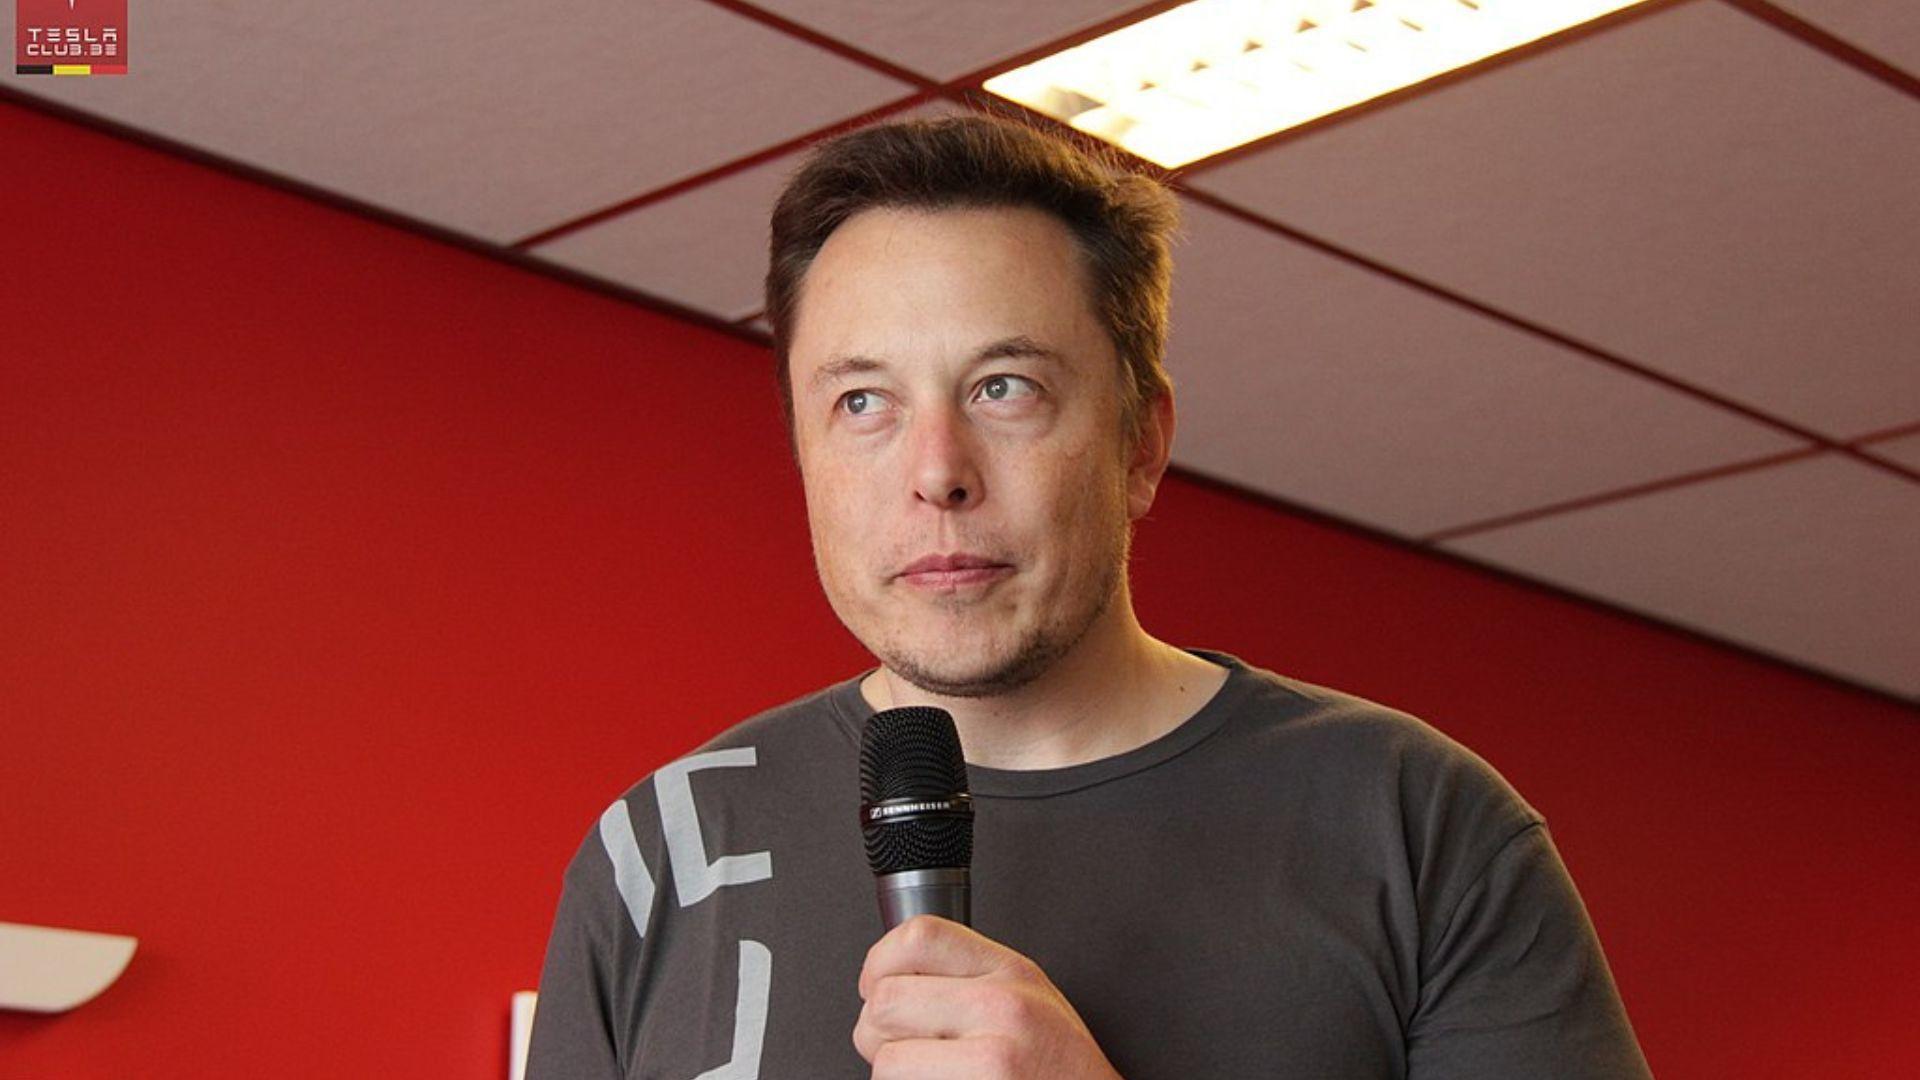 <p>As reported by Bazinga, Musk agreed with a machine learning scientist at Nvidia Corp when he stated that “there should be one billion Americans”.   </p> <p>In the past, the Tesla owner has expressed concerns of a world without enough people to keep the economy progressing. However, the global population has reached an unprecedented 8.1 billion and continues to grow as of 2024.   </p>